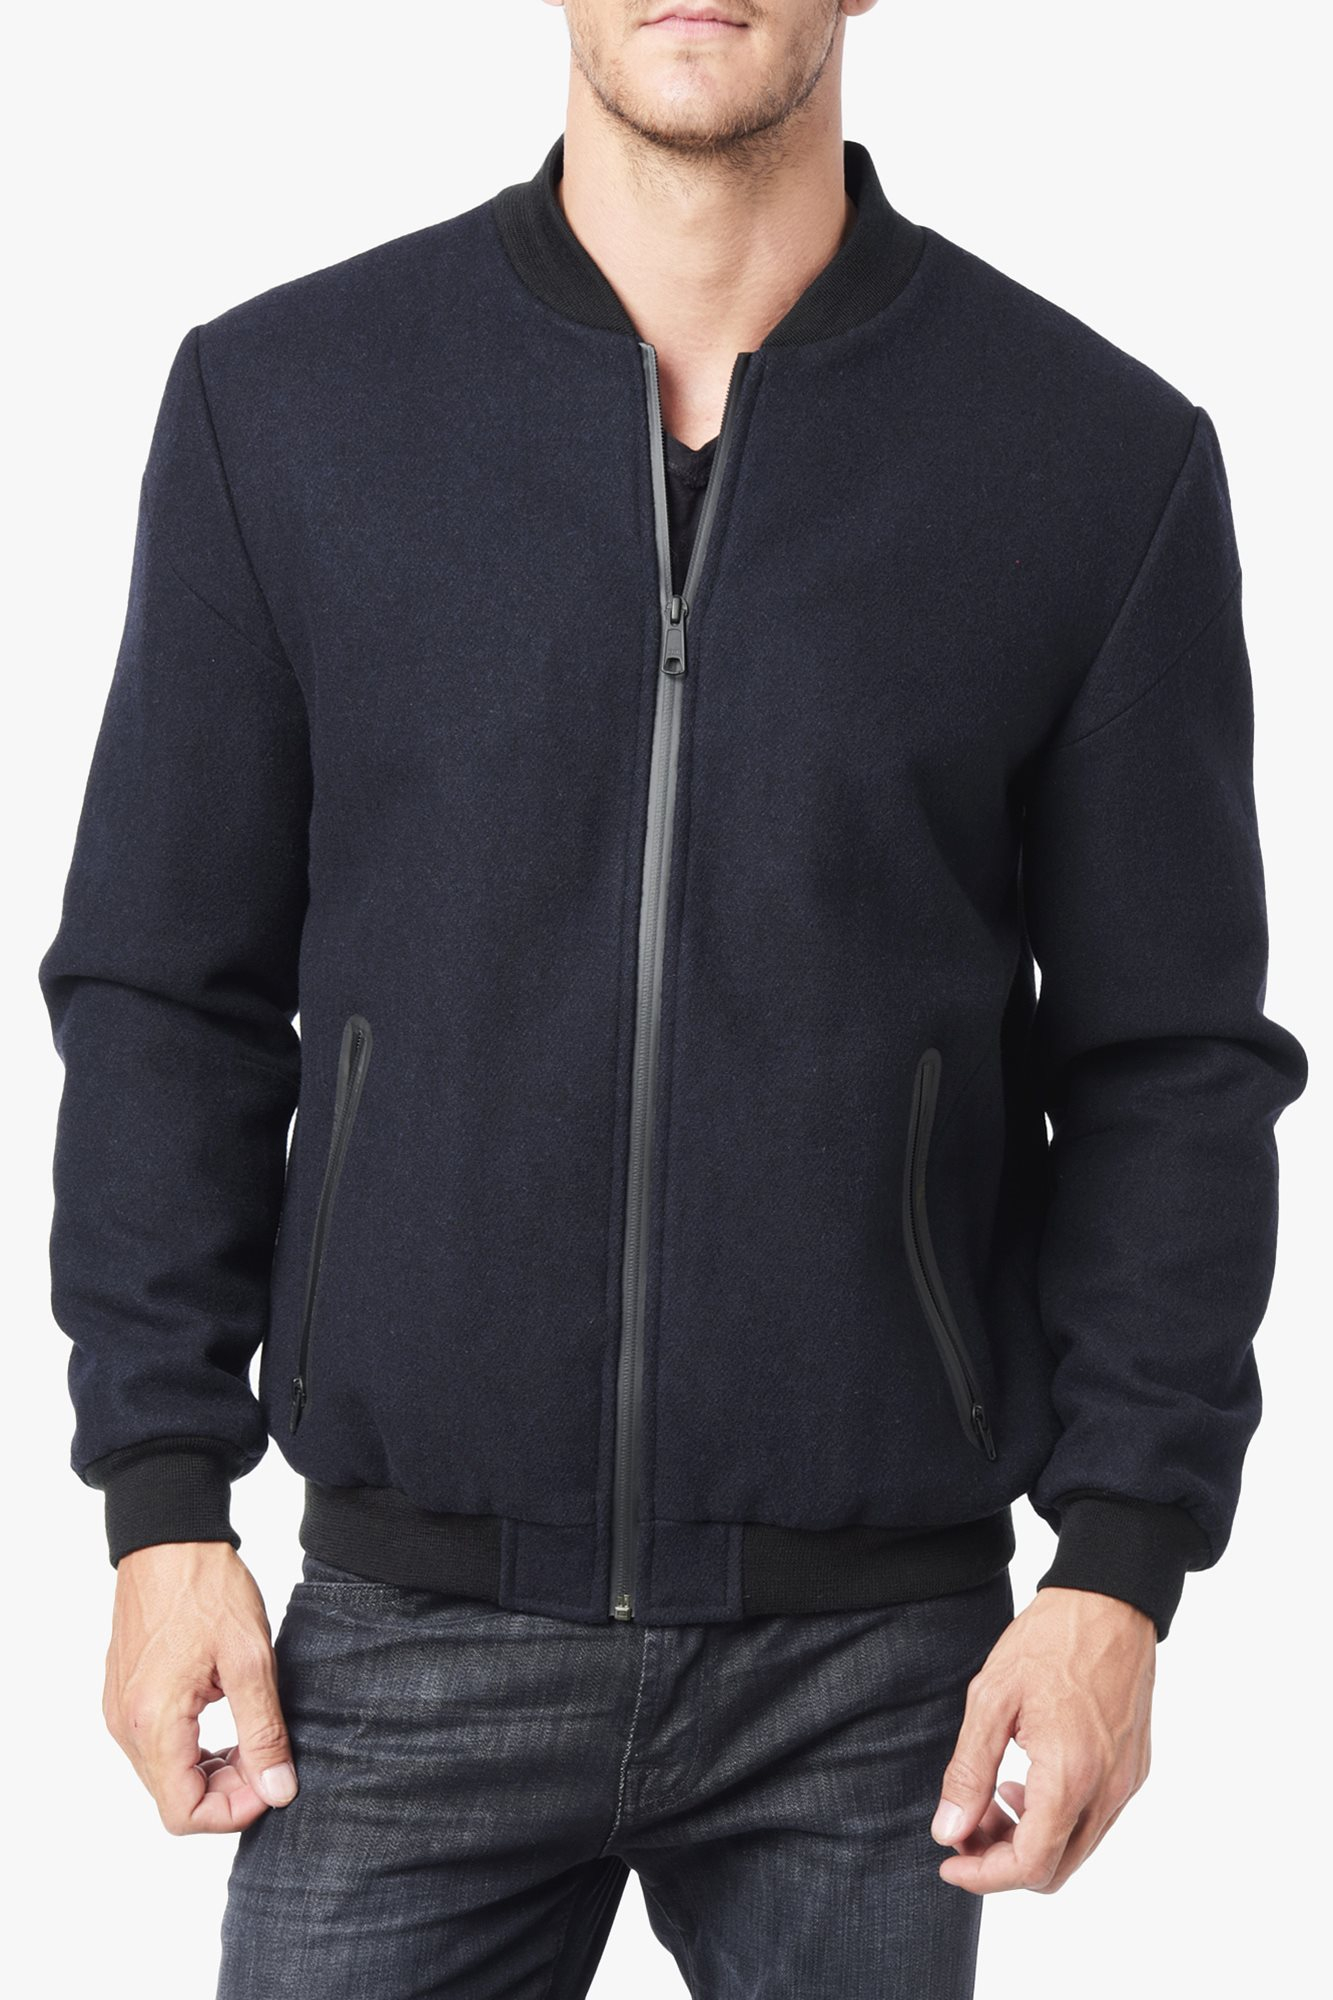 Lyst 7 For All Mankind iWool Bomber Jacketi in Blue for Men